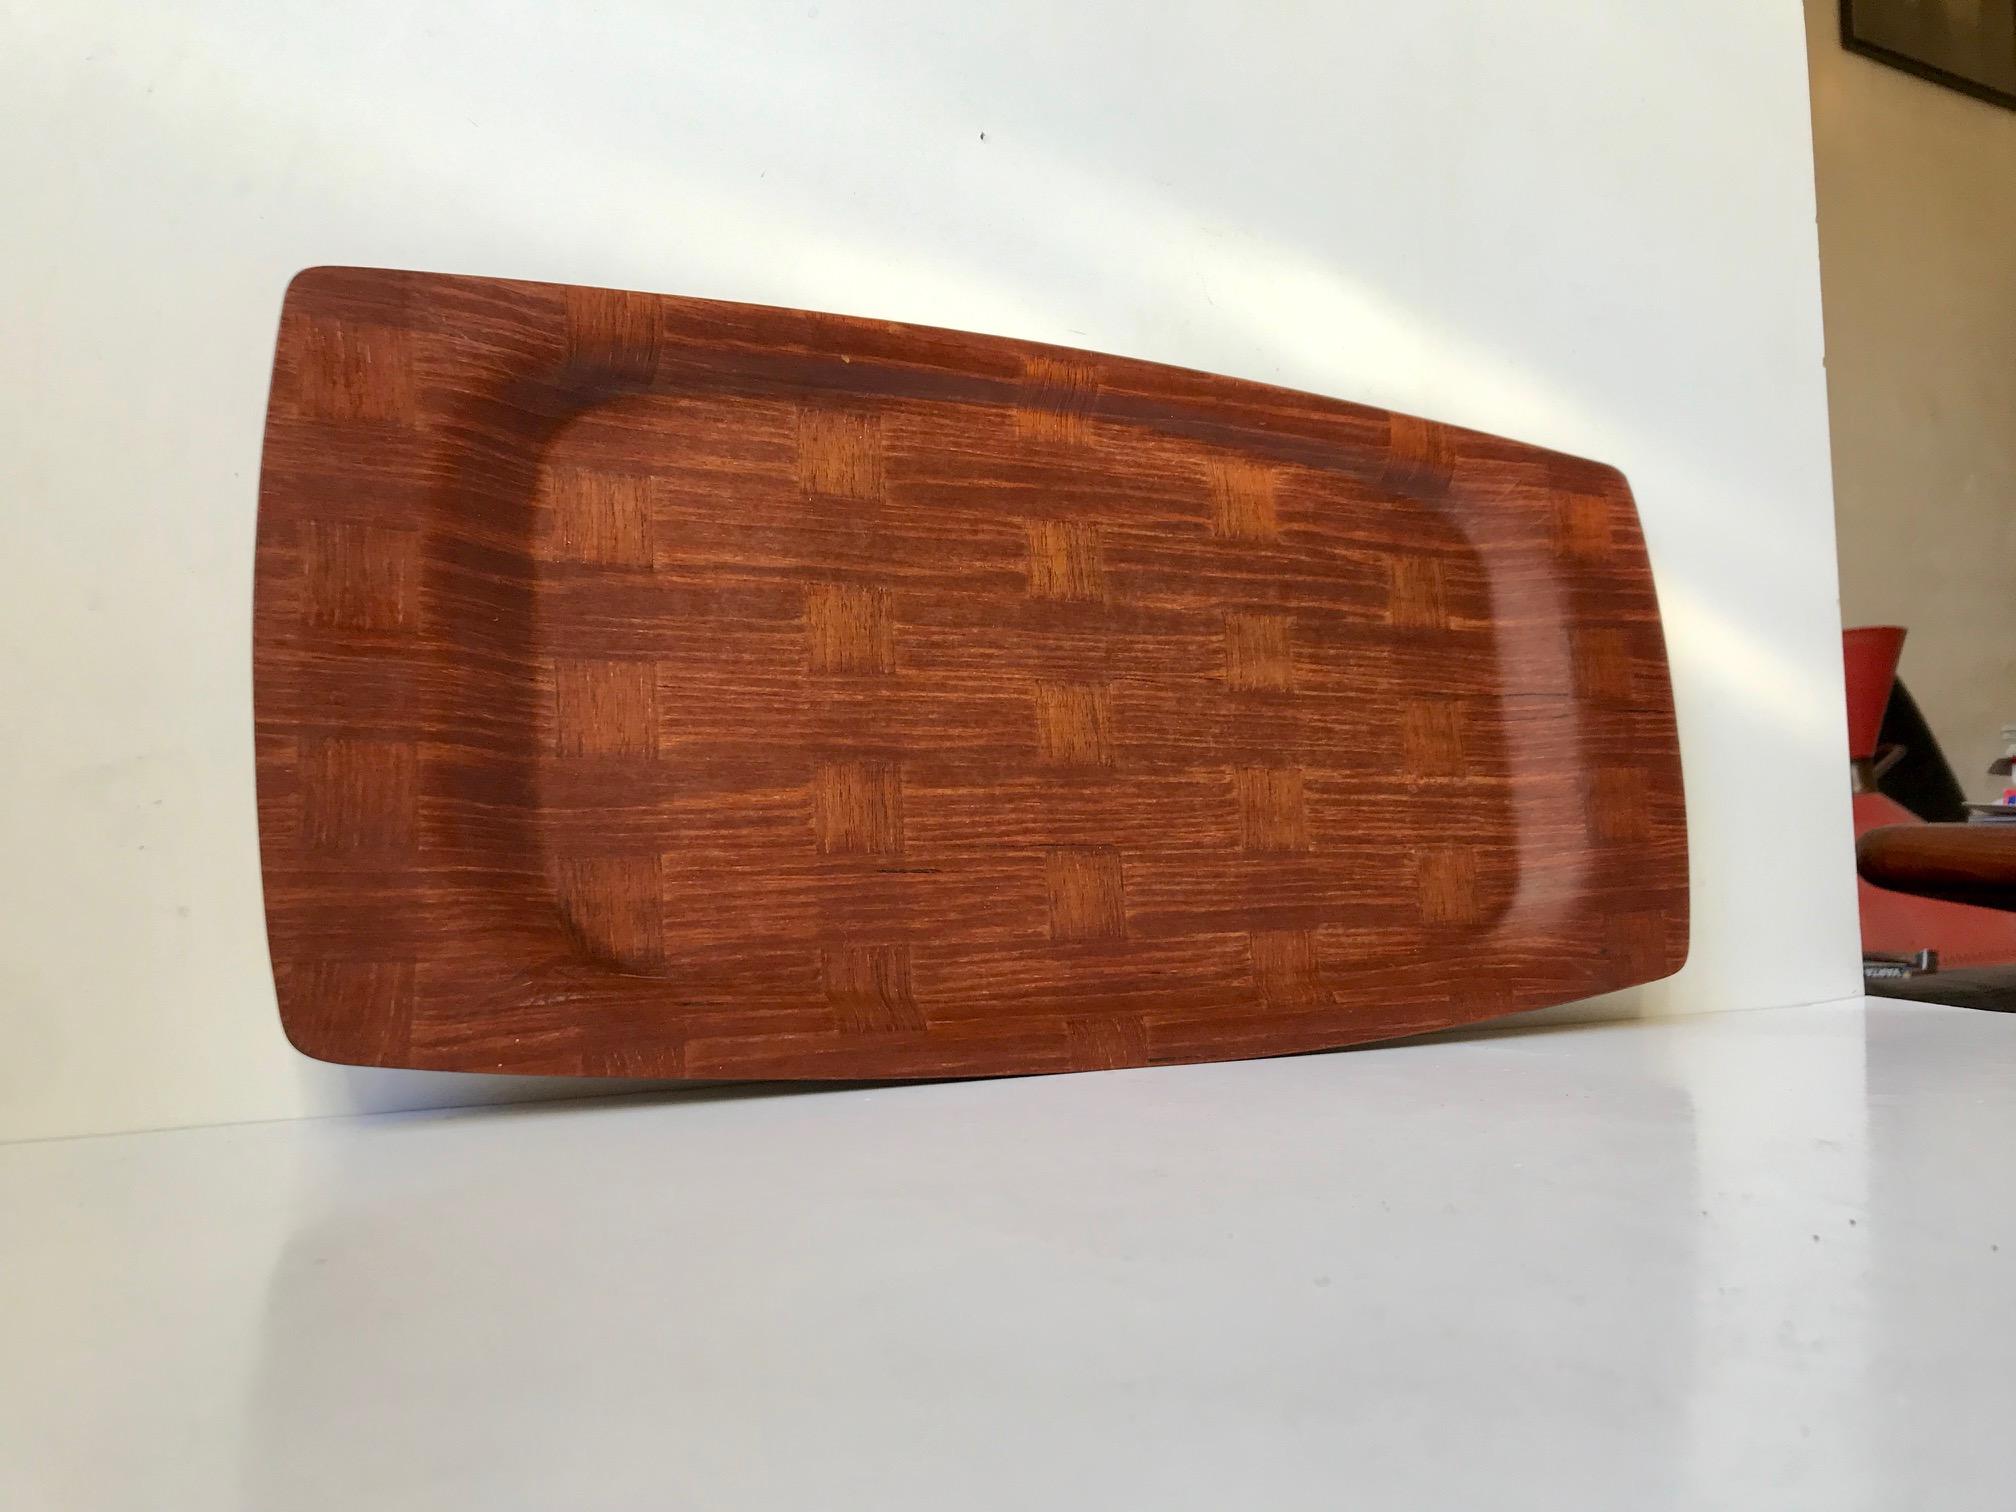 Oblong tray or serving tray in checkered teak veneer. Designed and manufactured by Silva in Denmark during the 1970s. Suitable as a decorative piece to your midcentury table or for serving drinks/snacks.